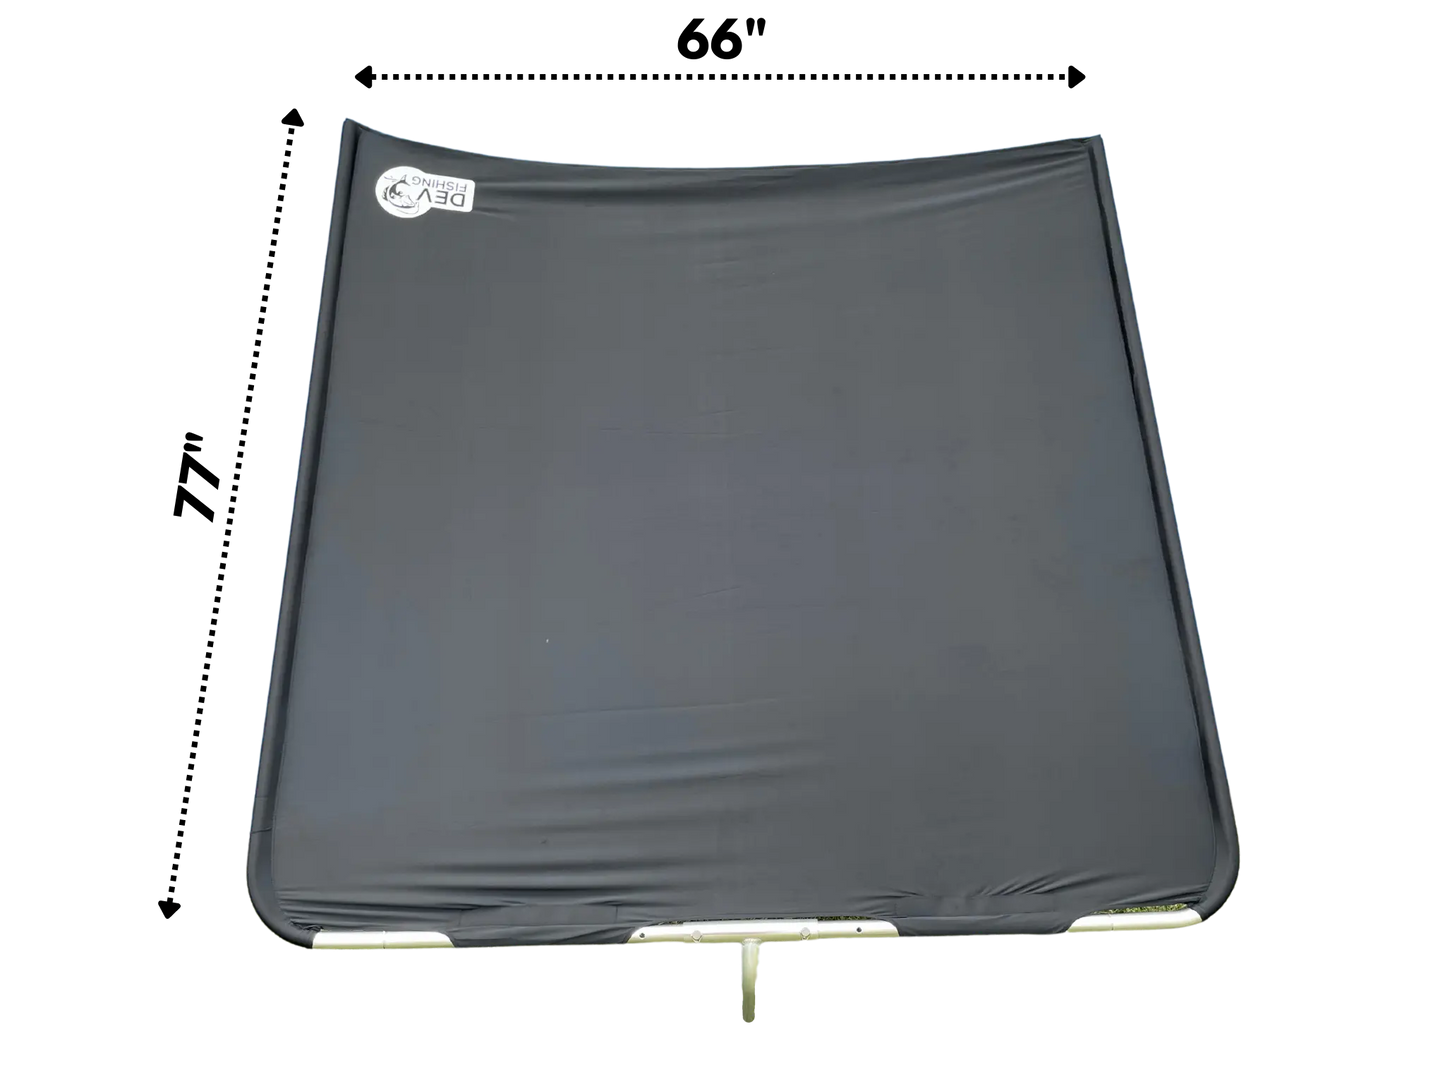 Dev Fishing Fabric Boat Shade Canopy Top Cover (Black)